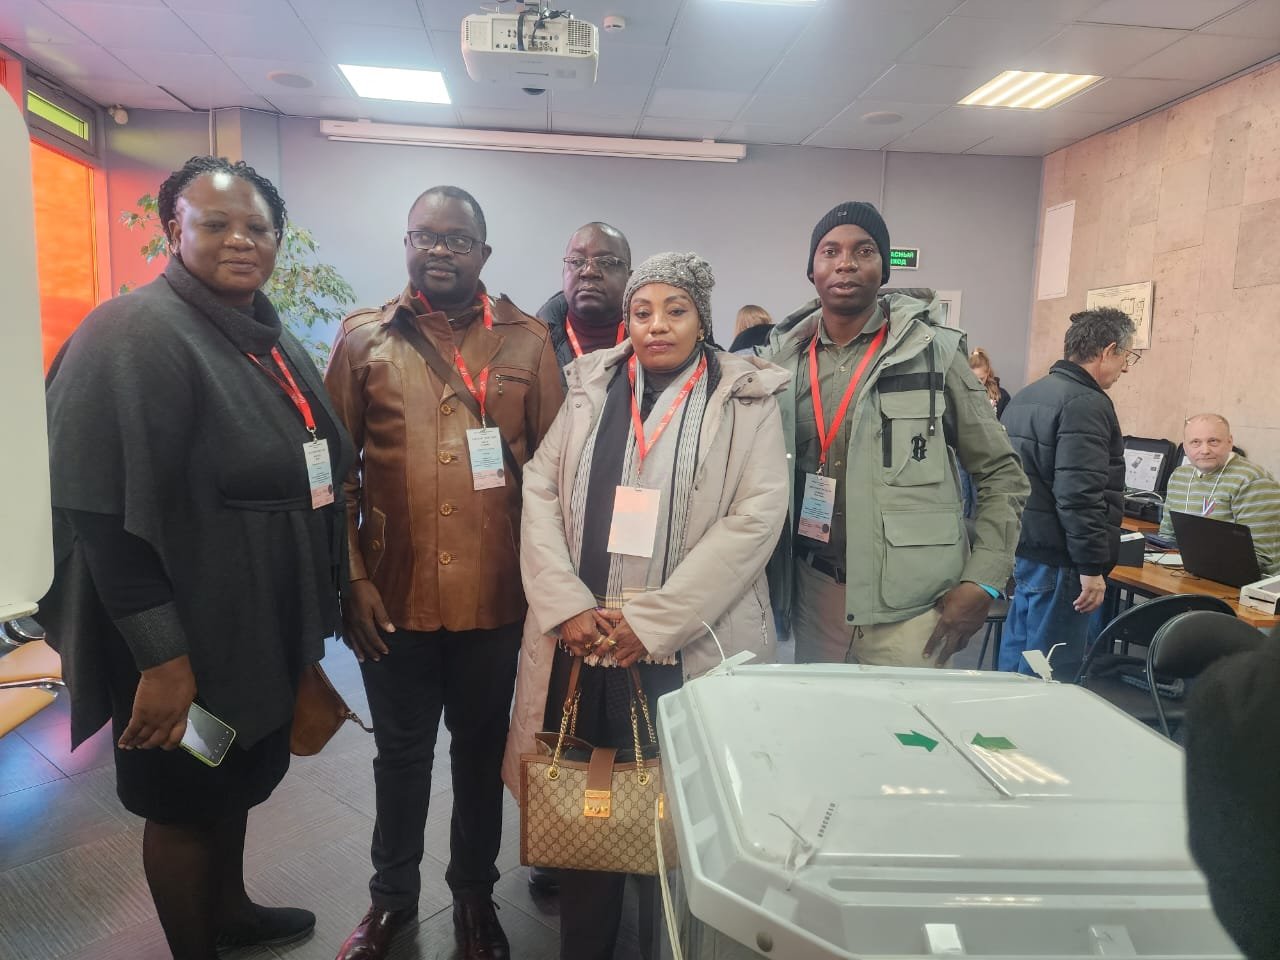 Russia Election observed by a delegation led by ZEC Chairperson Justice Priscilla Makanyara Chigumba | Report Focus News